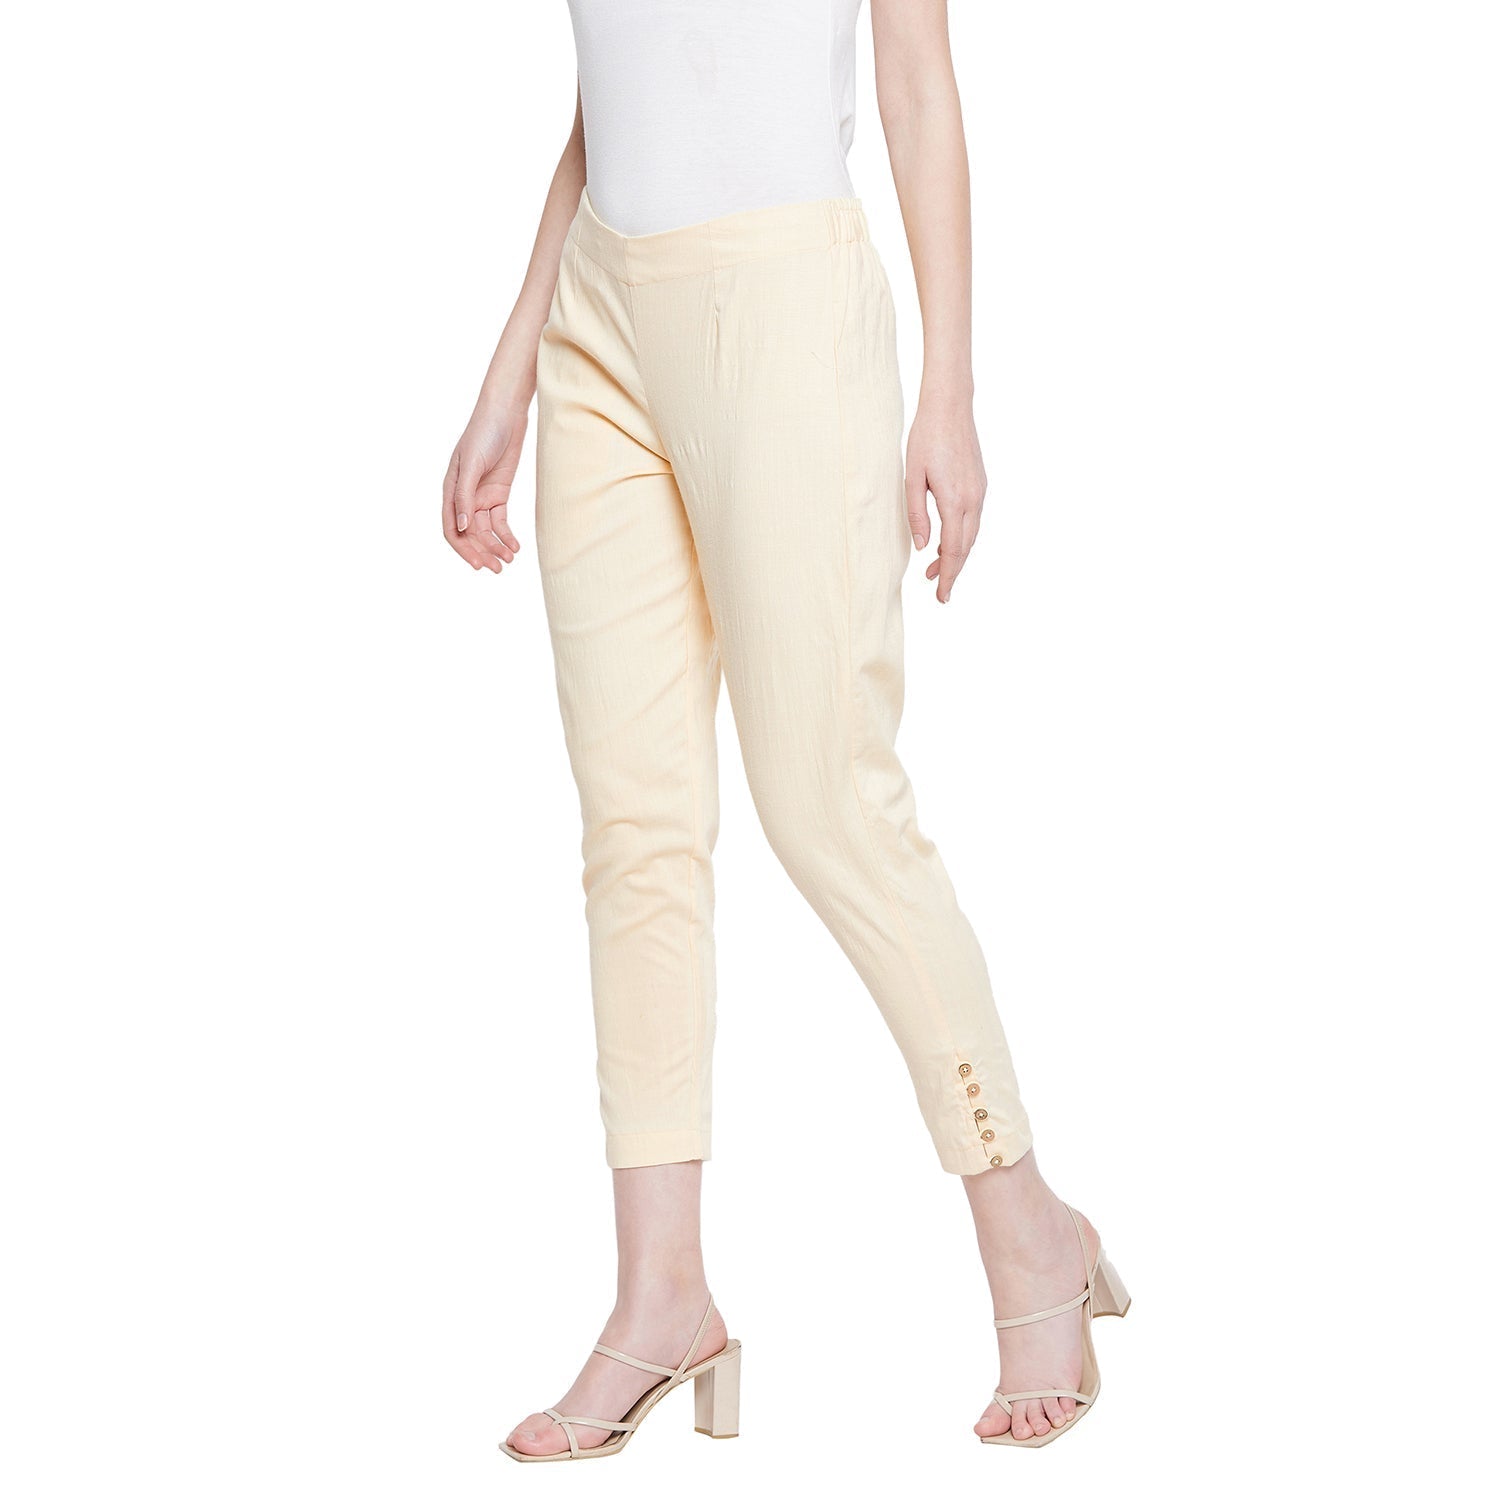 Buy NAARI Cream Cotton Stretch Drill Fabric Slim Fit Embroidered Cigarette  Pant for Women's at Amazon.in